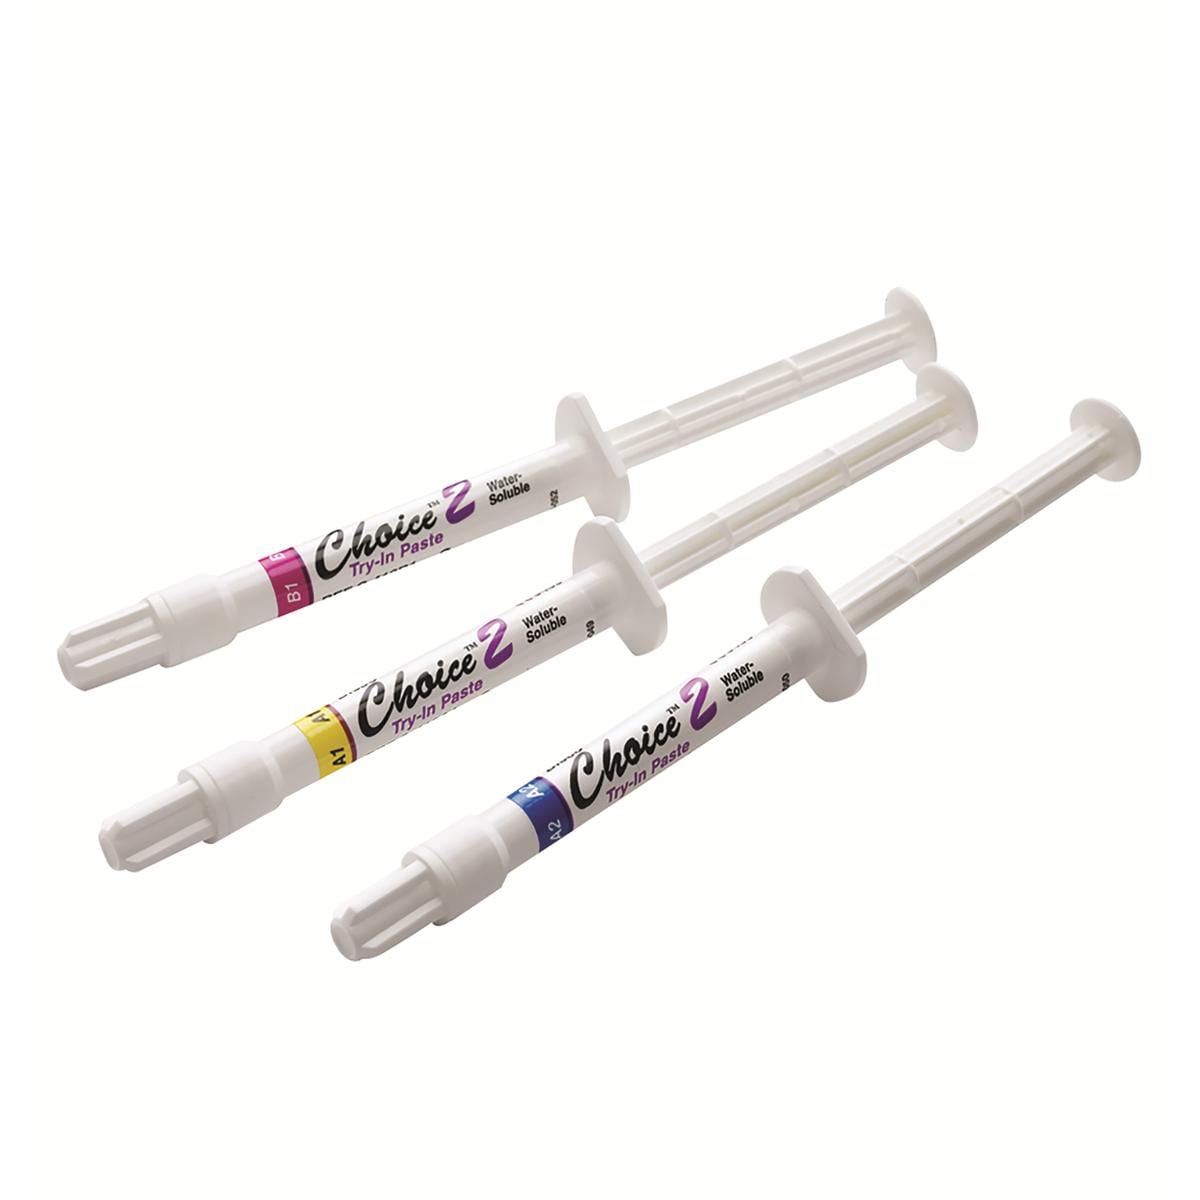 Choice 2 Try In Paste Syringe 2g B1